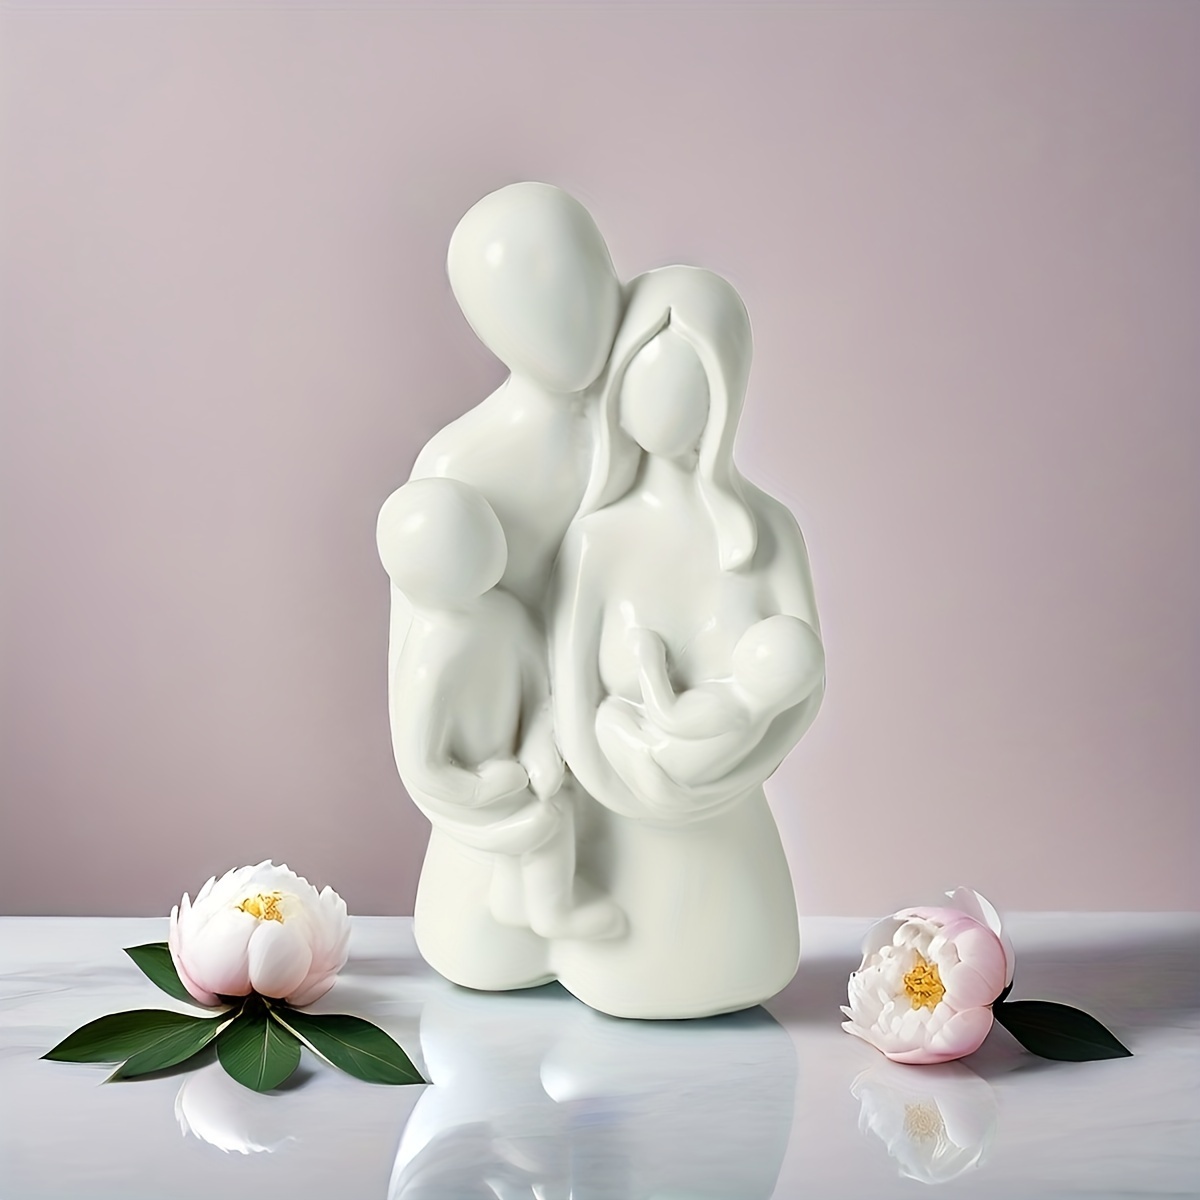 

1pc, Abstract Family Of 4 Figurine, Nordic Style Resin Statue, Luxury Home Decor, 14.5cm/5.7in Tall, Ideal For Living Room And Office Decoration